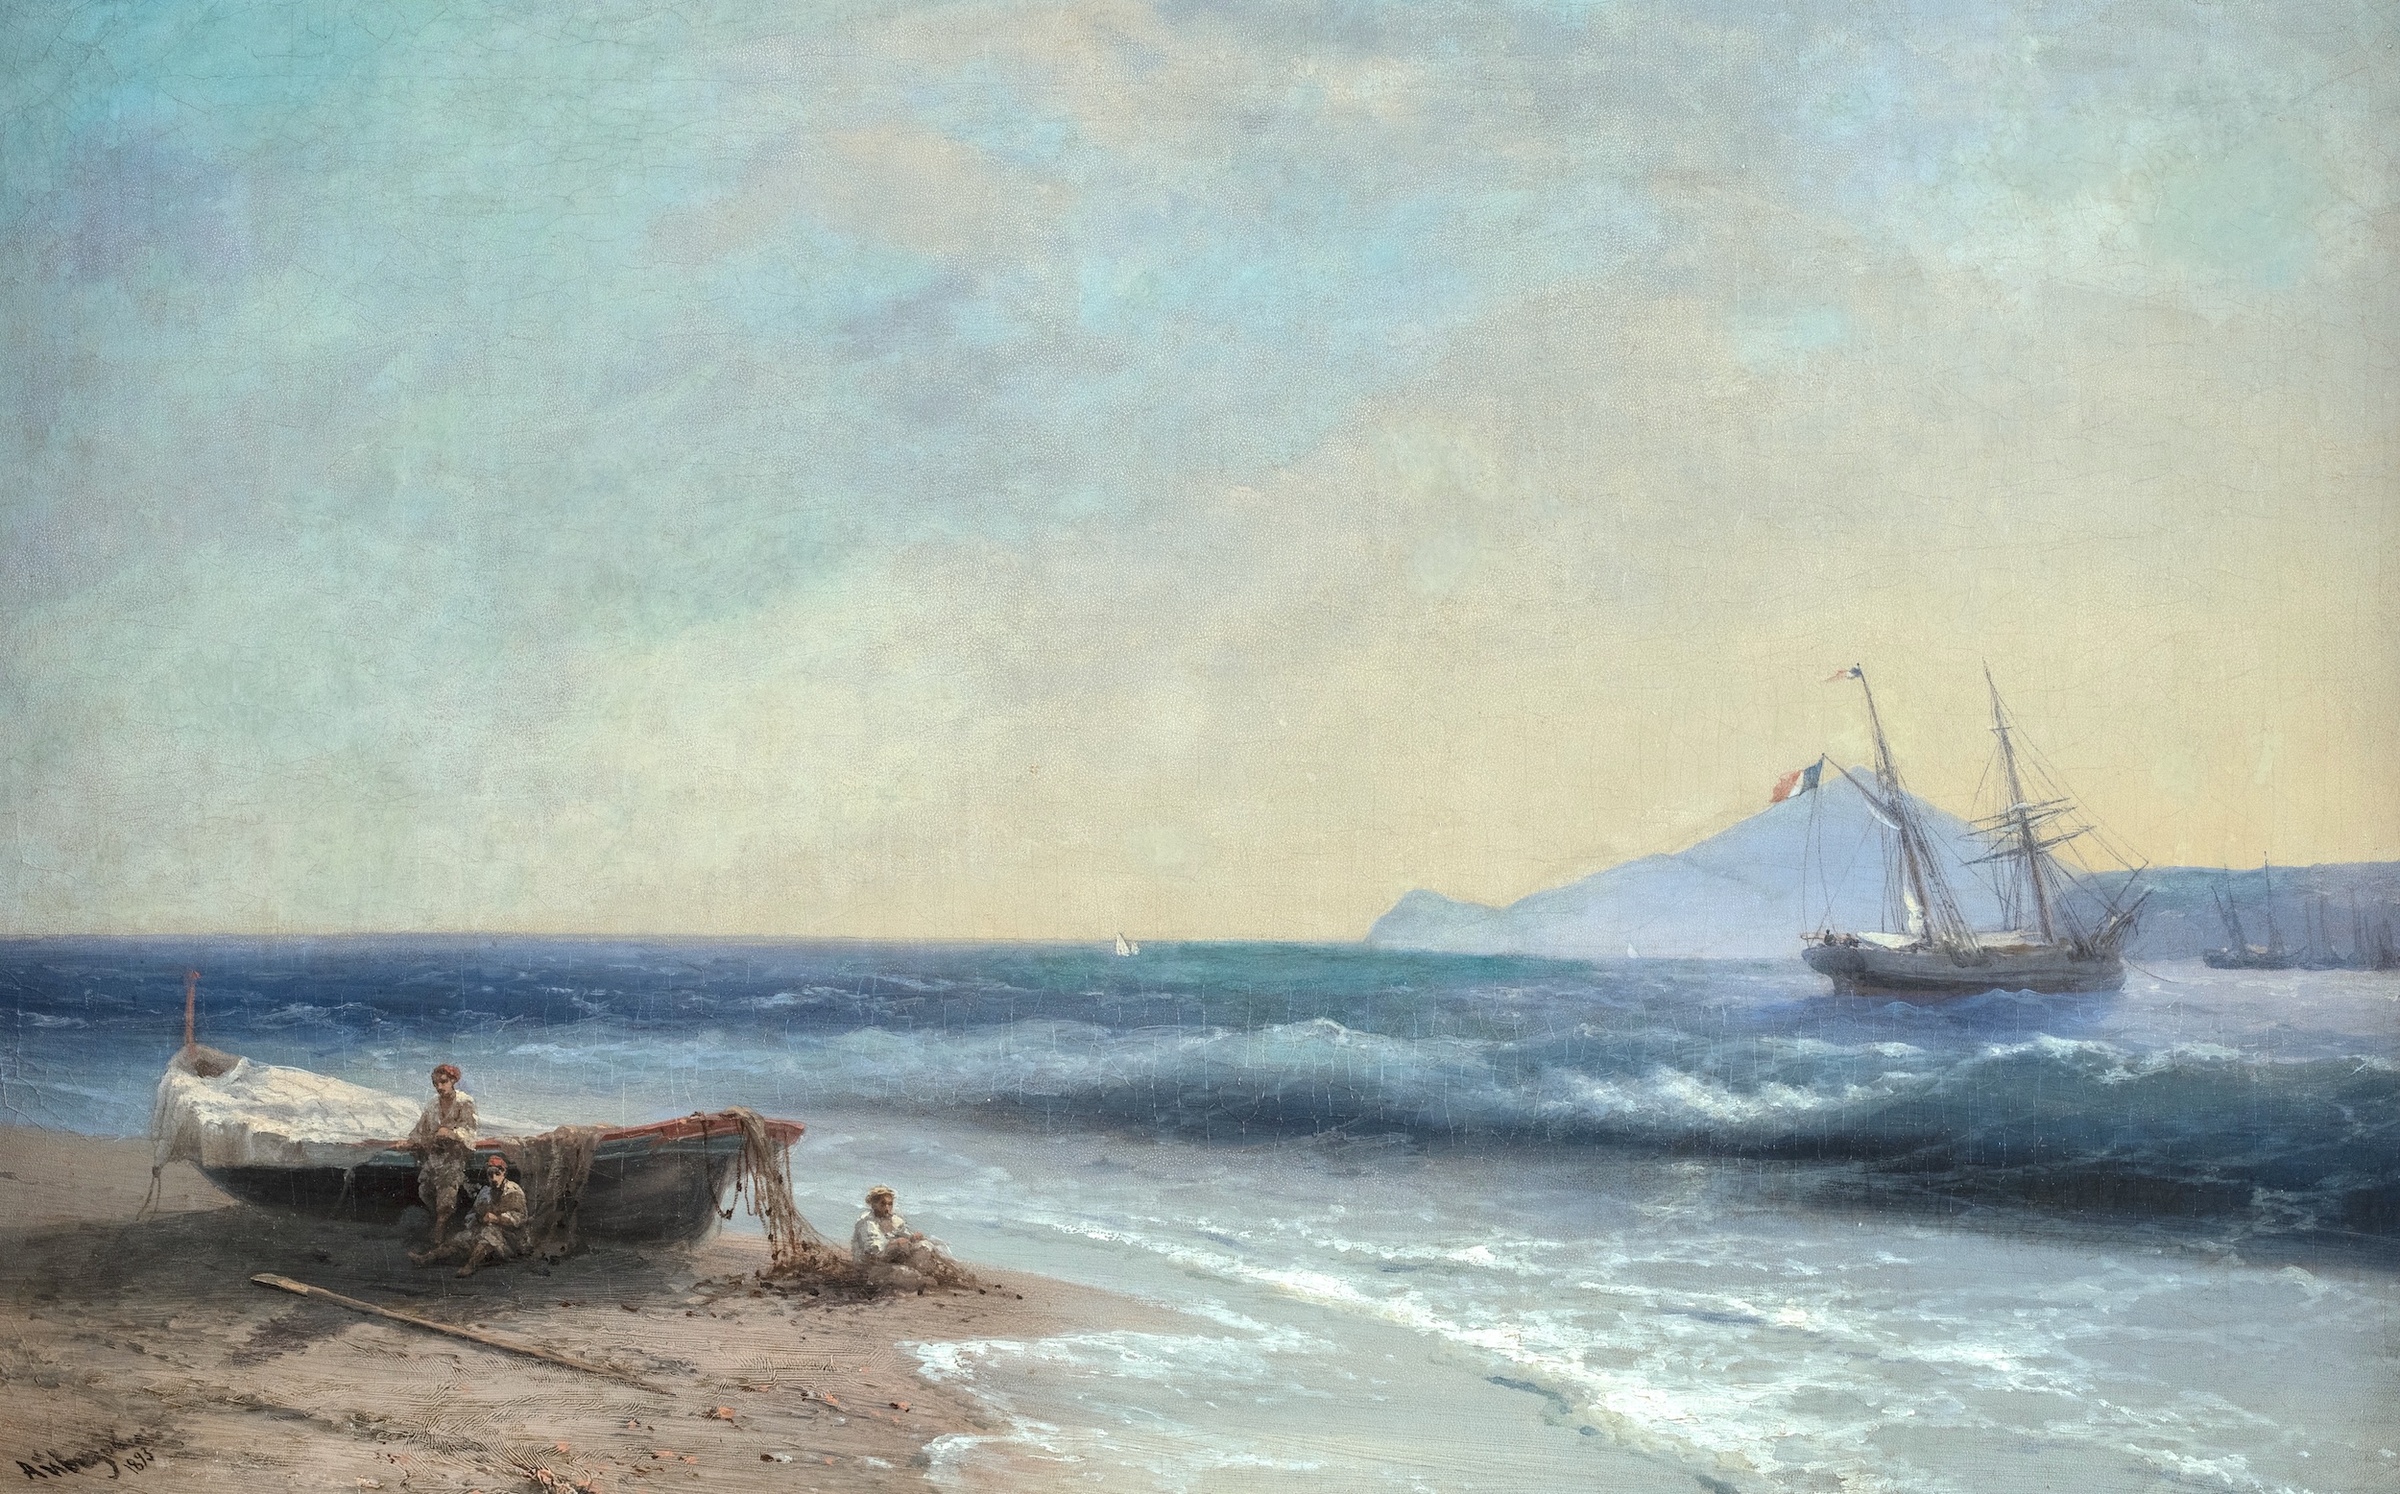 <a href='/catalogue/view?id=16071'>lot</a> AIVAZOVSKY, IVAN, <i>Off the Southern Coast</i><br> SOLD FOR 514,000 GBP.